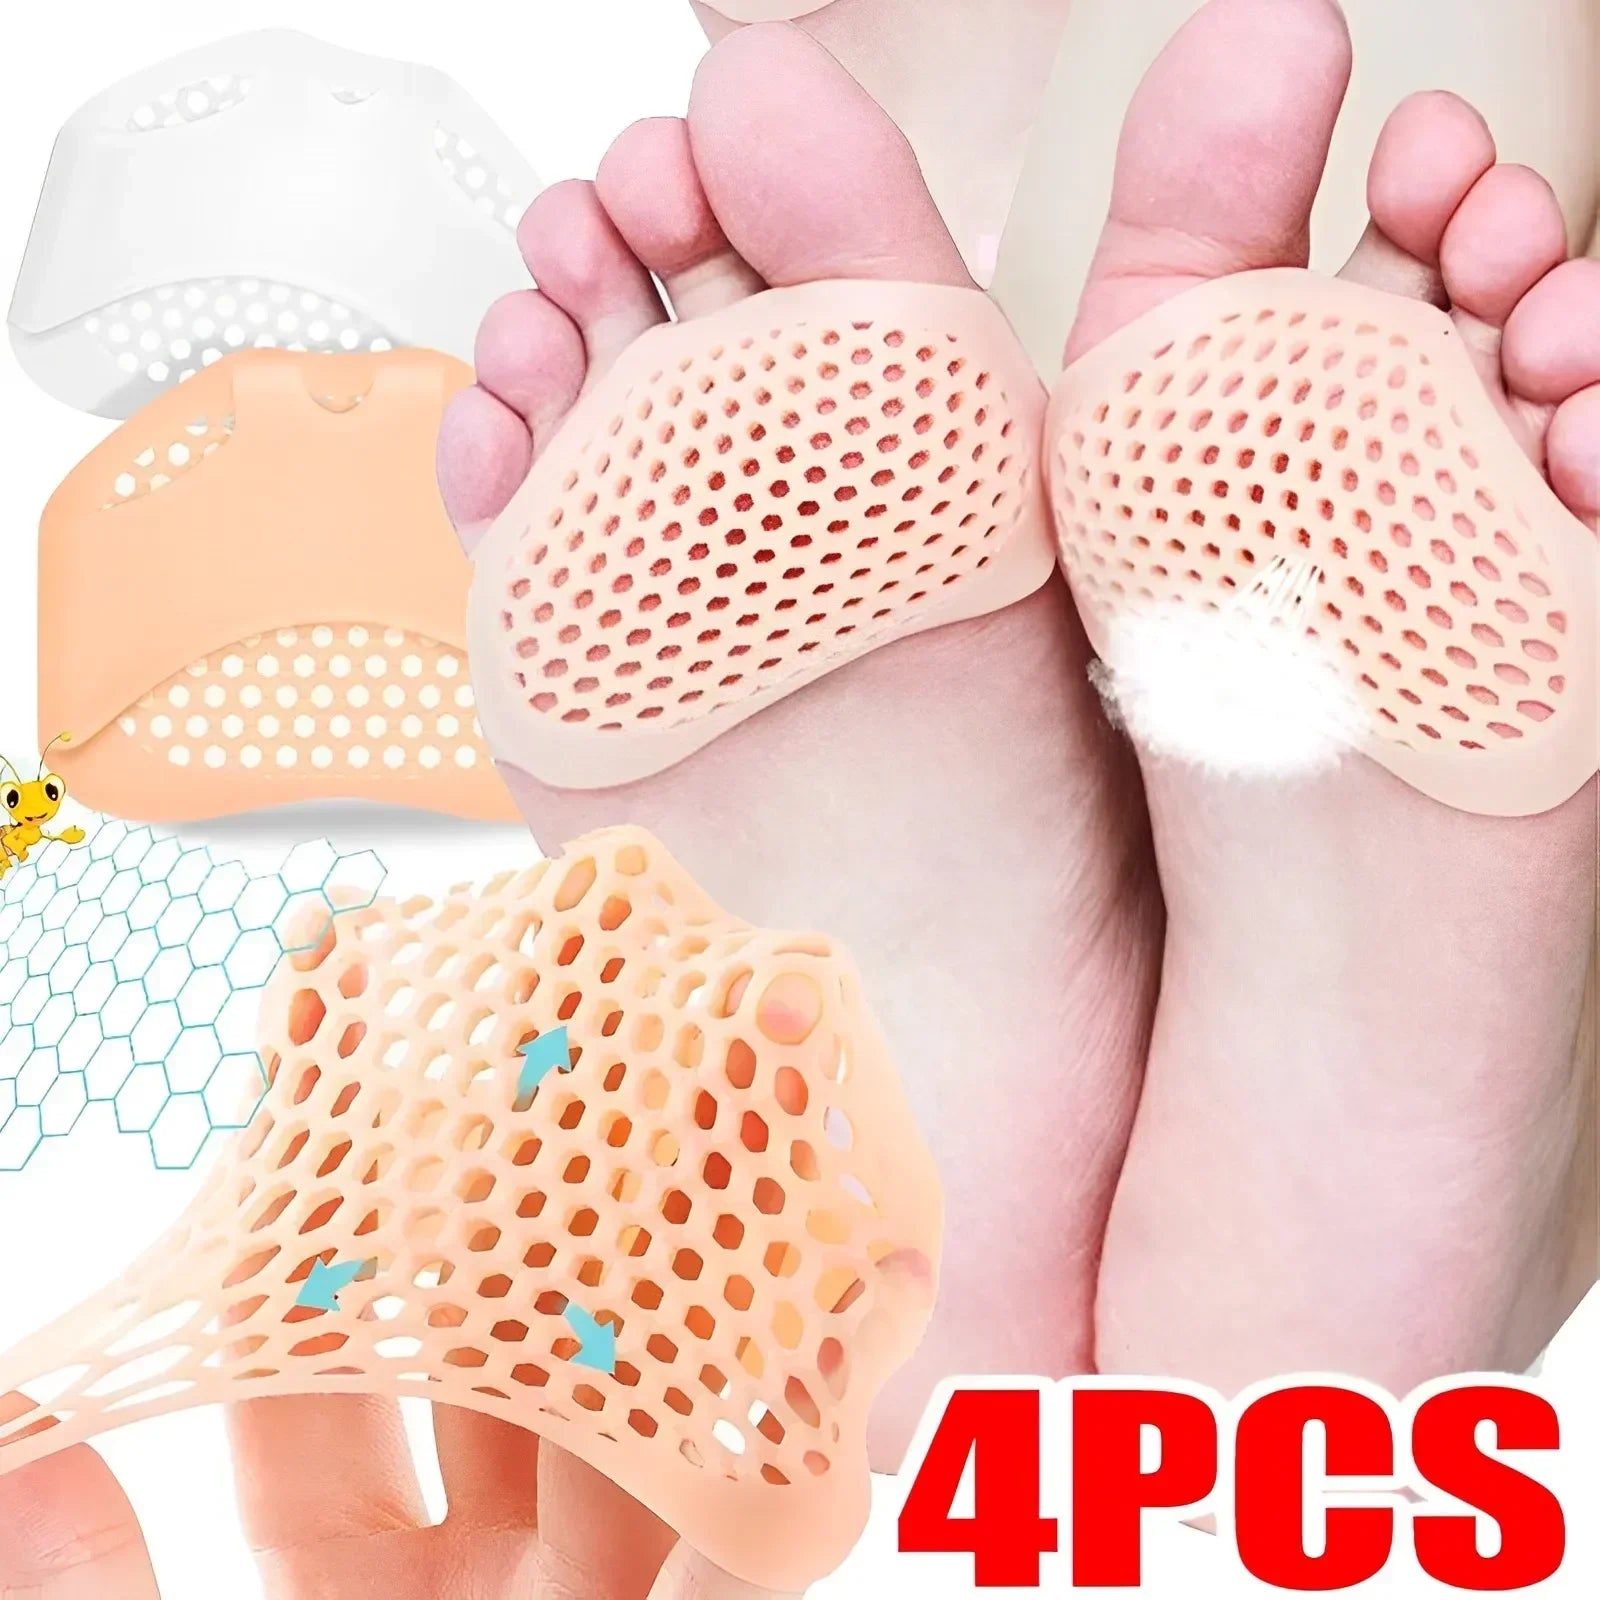 Metatarsal Pads for Improved Foot Comfort - 4PCS 